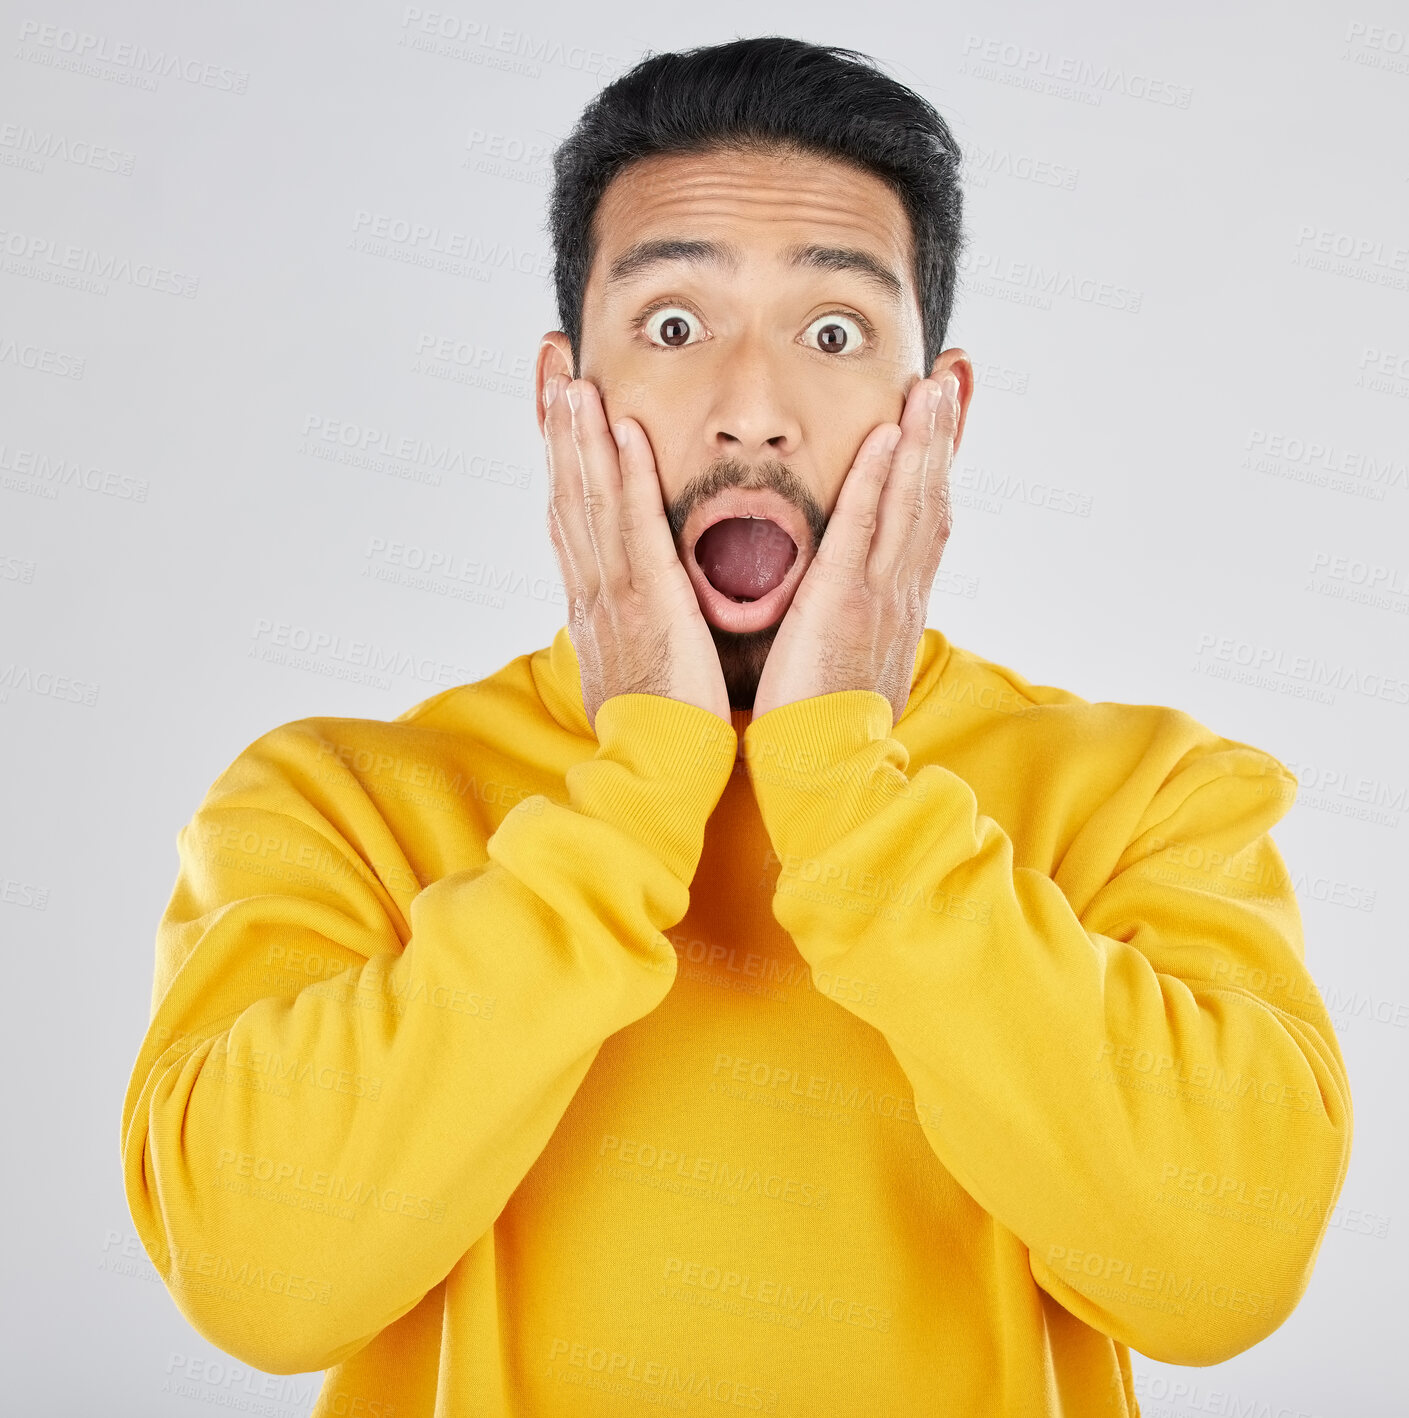 Buy stock photo Wow, news and hands on face of man in studio for omg, surprise or promo on white background. Wtf, emoji and portrait of Japanese guy model shocked by announcement, gossip info or coming soon sale